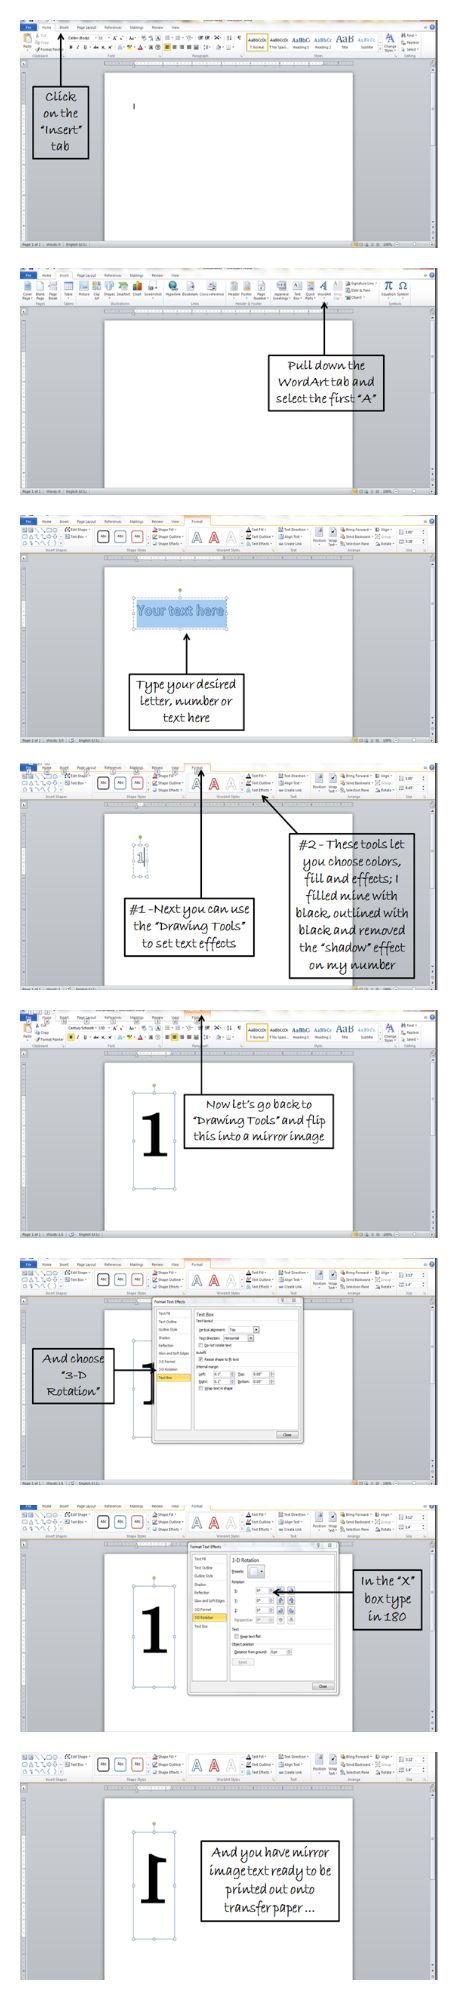 reverse image in word for iron on transfer mac